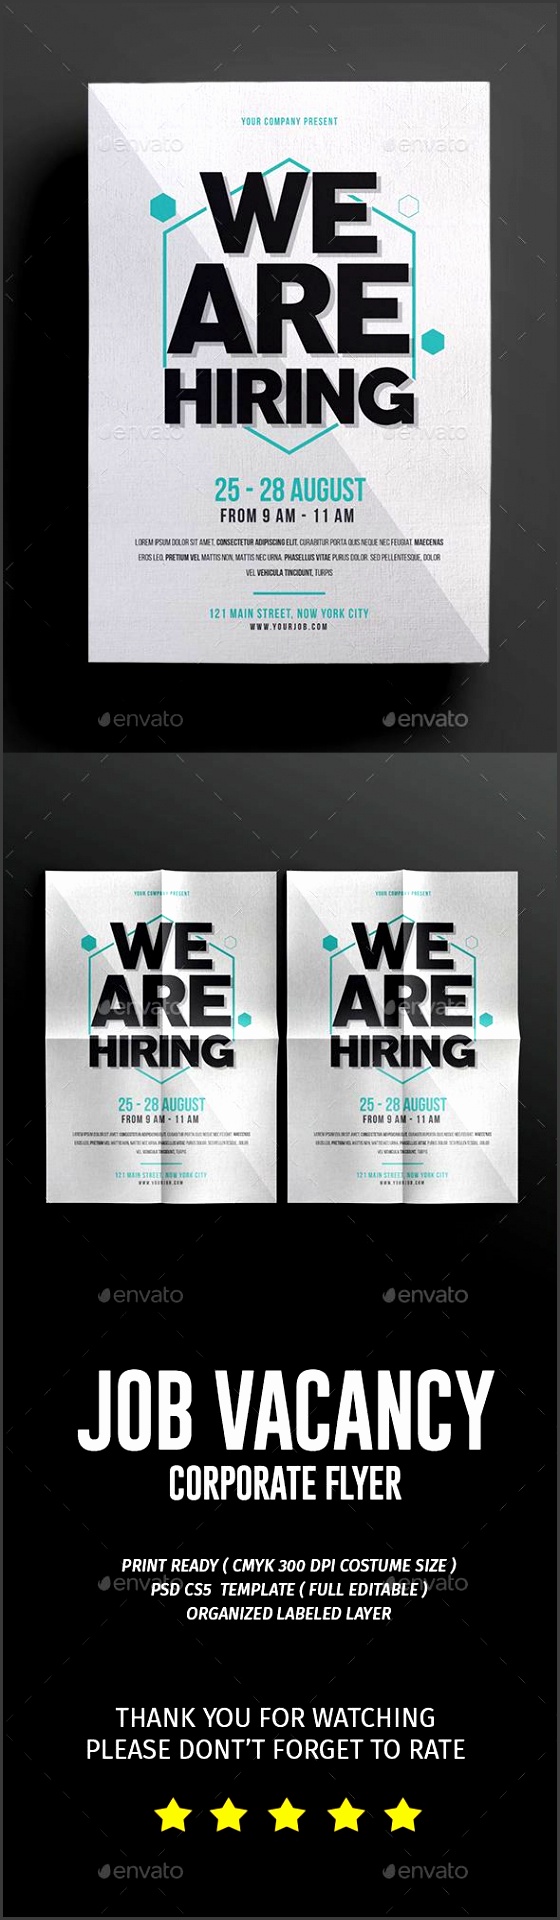 524 best resume templates images on pinterest business cards b66a0e0b100ae7c4b2afc2b623c54d5b resume templates now hiring flyer template